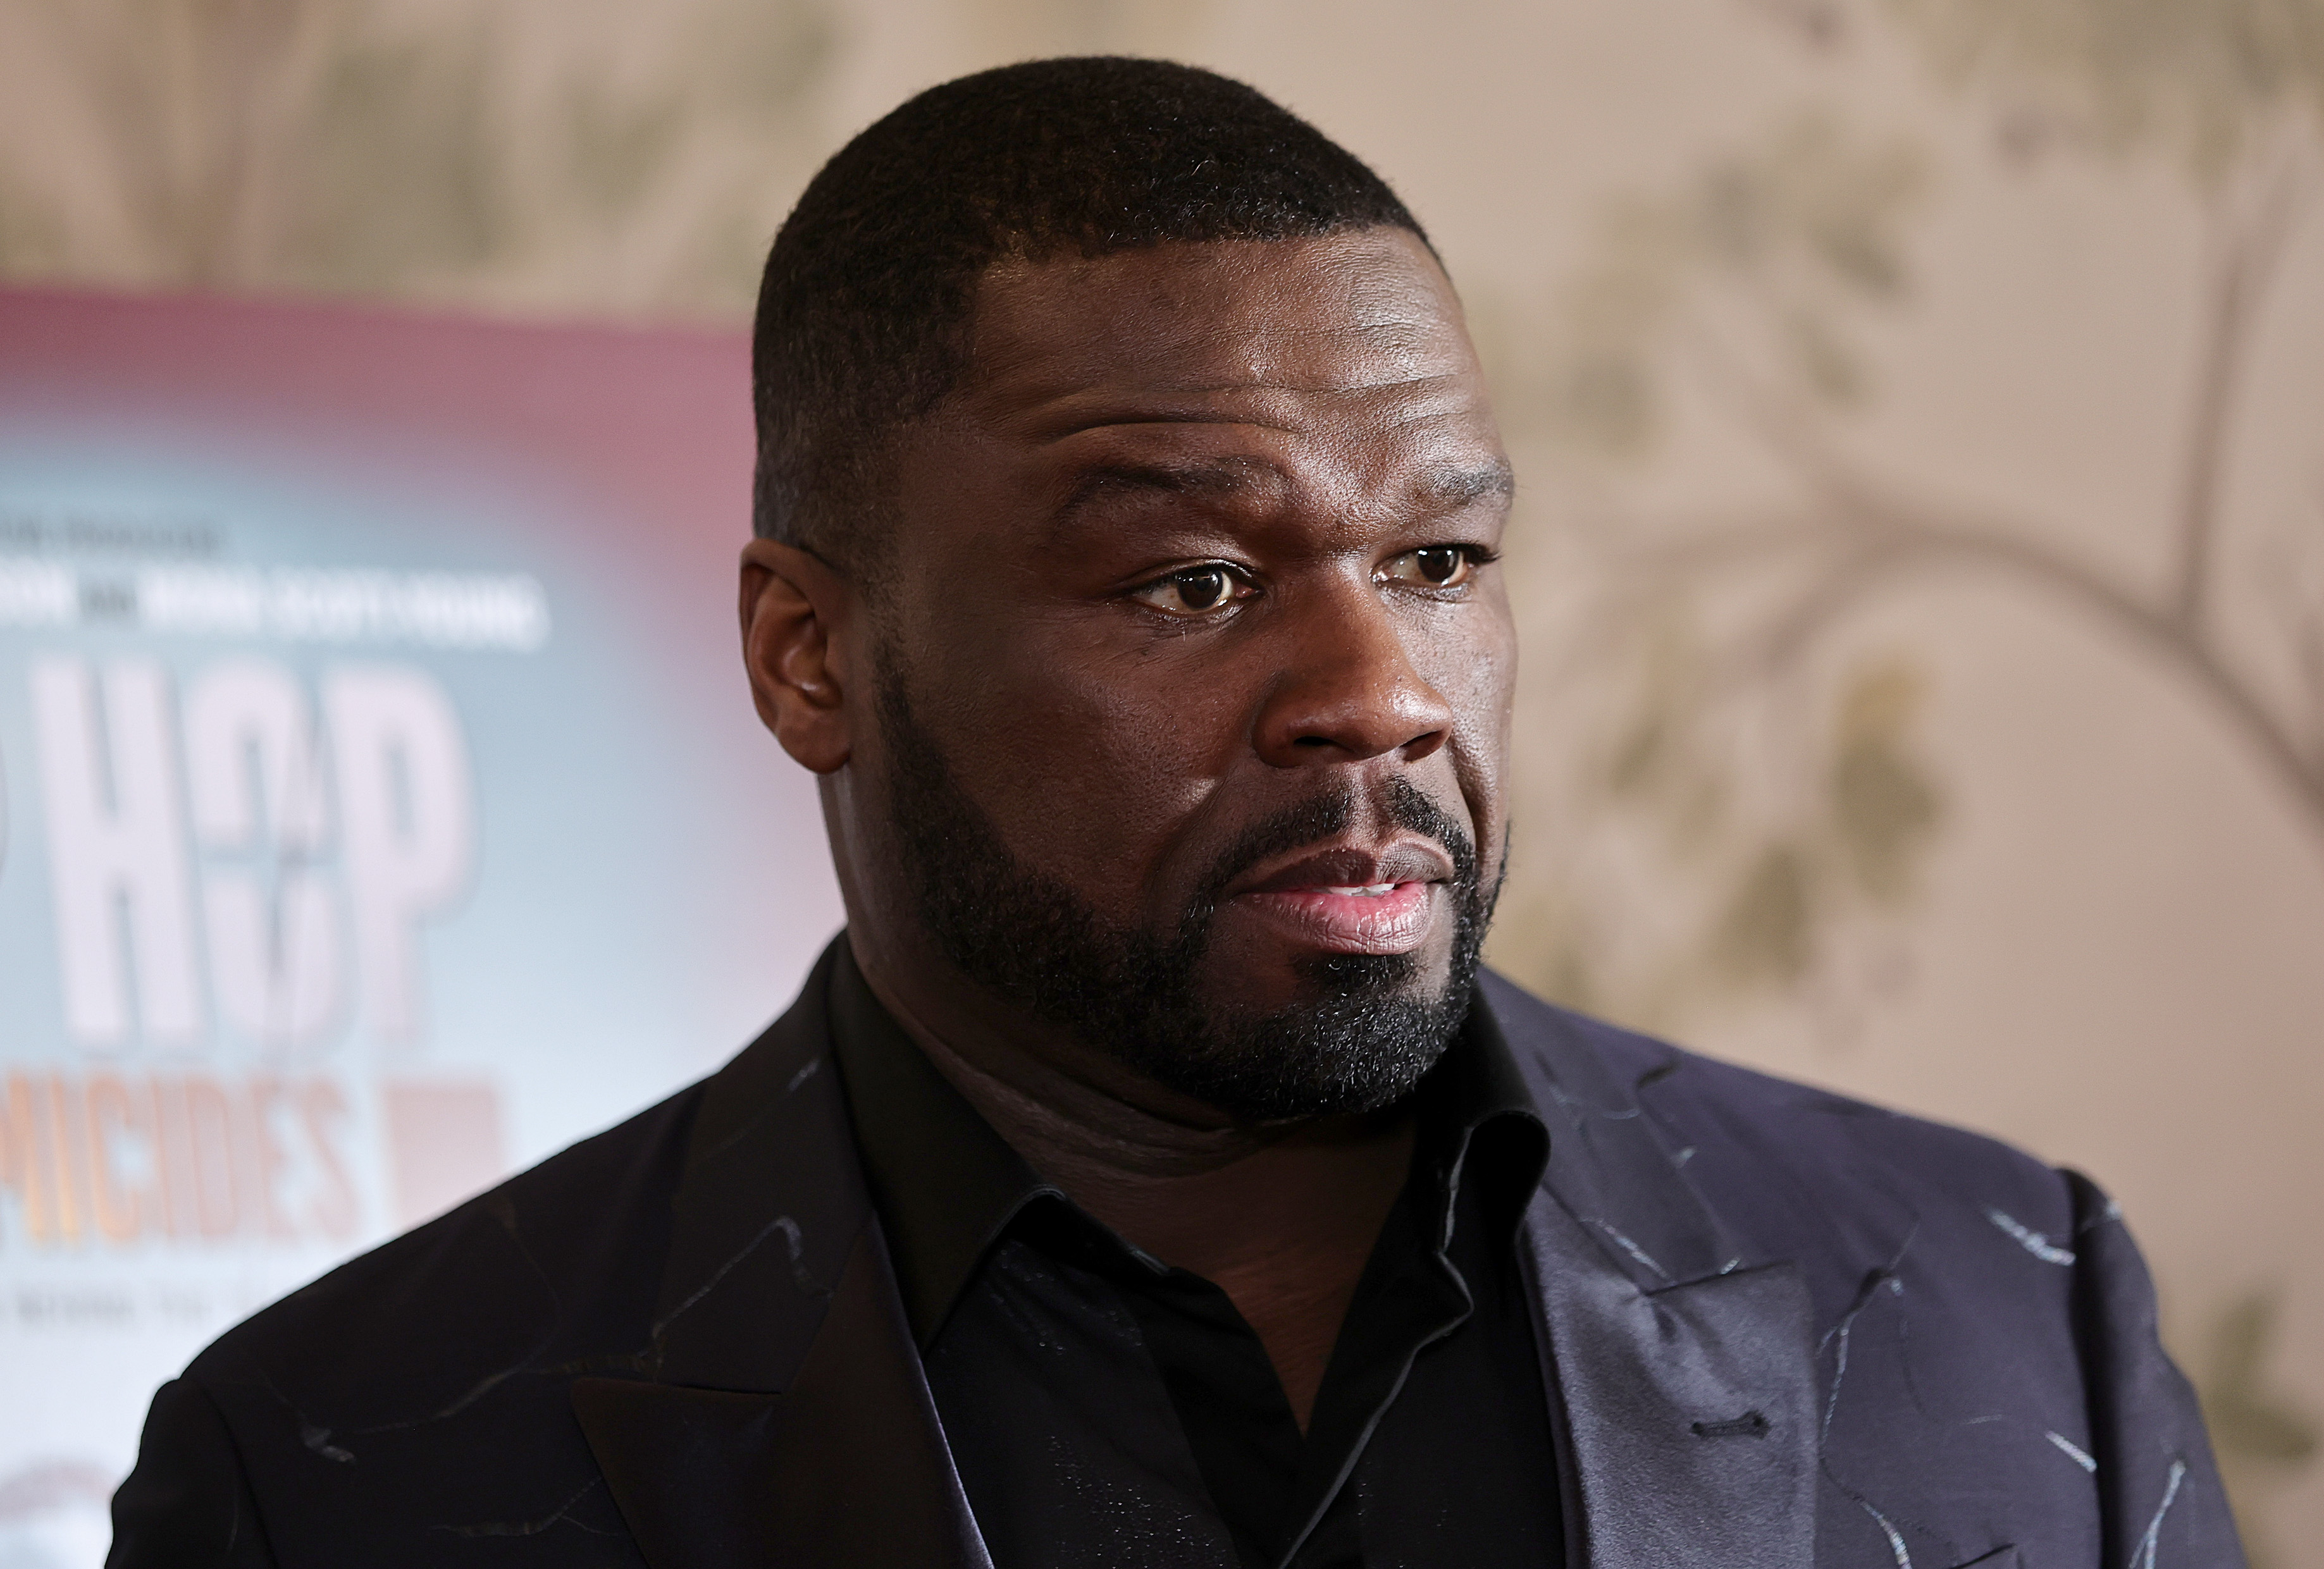 50 Cent & G-Unit’s Reebok Collab Almost Outsold Jordan’s, Claims Reebok CEO